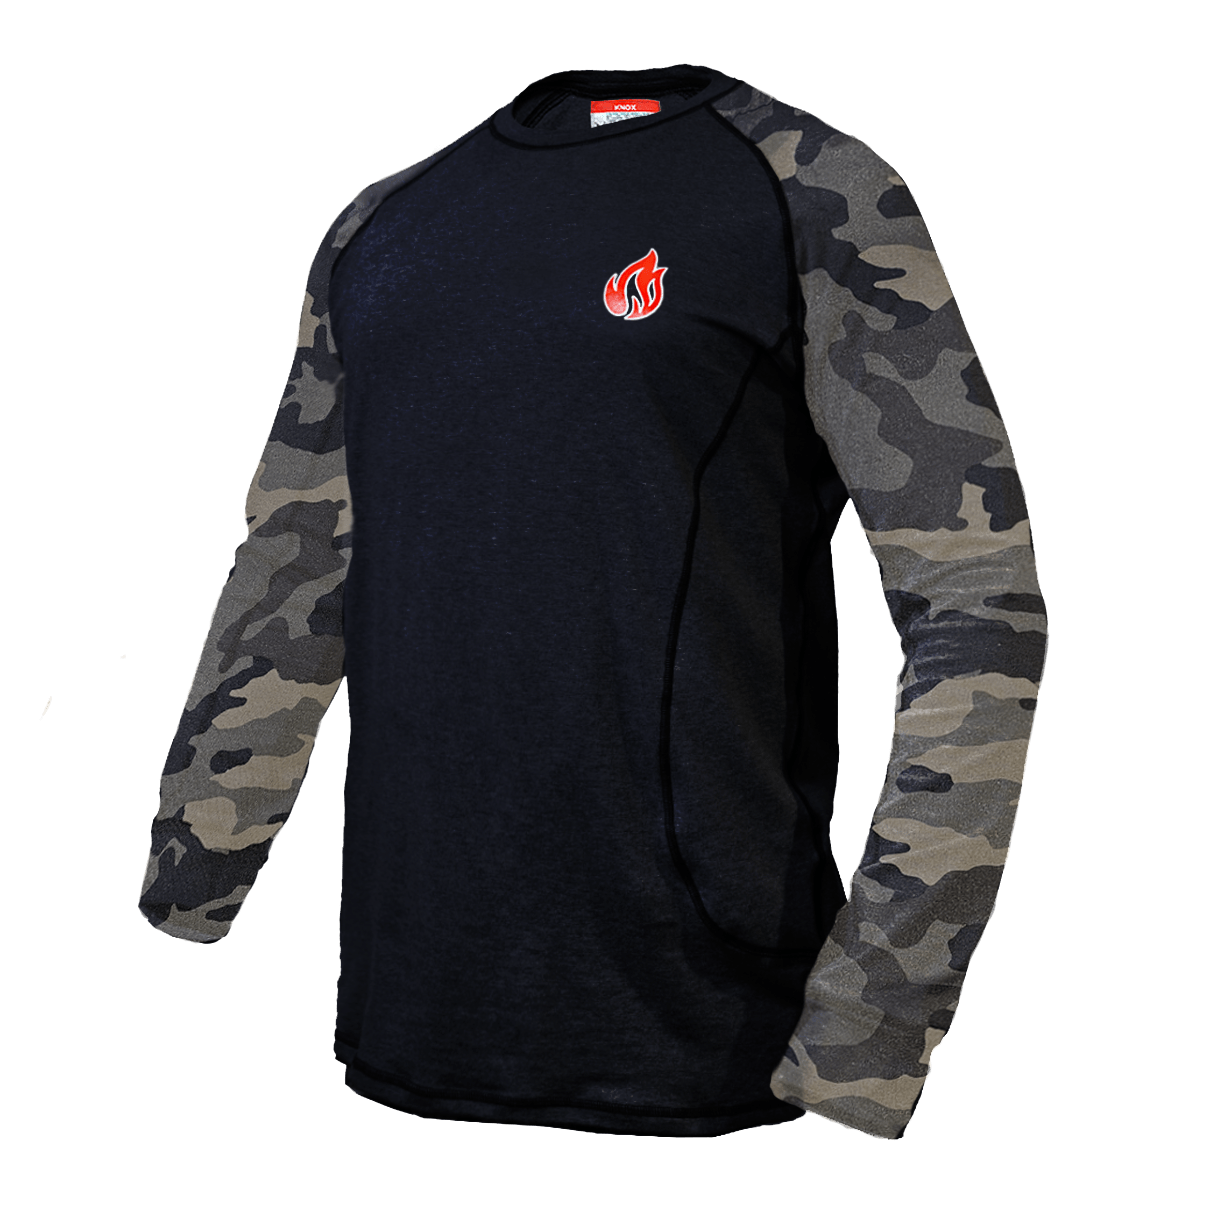 Knox Incorporated Apparel & Accessories Knox FR Long Sleeve Crew Shirt - Camo